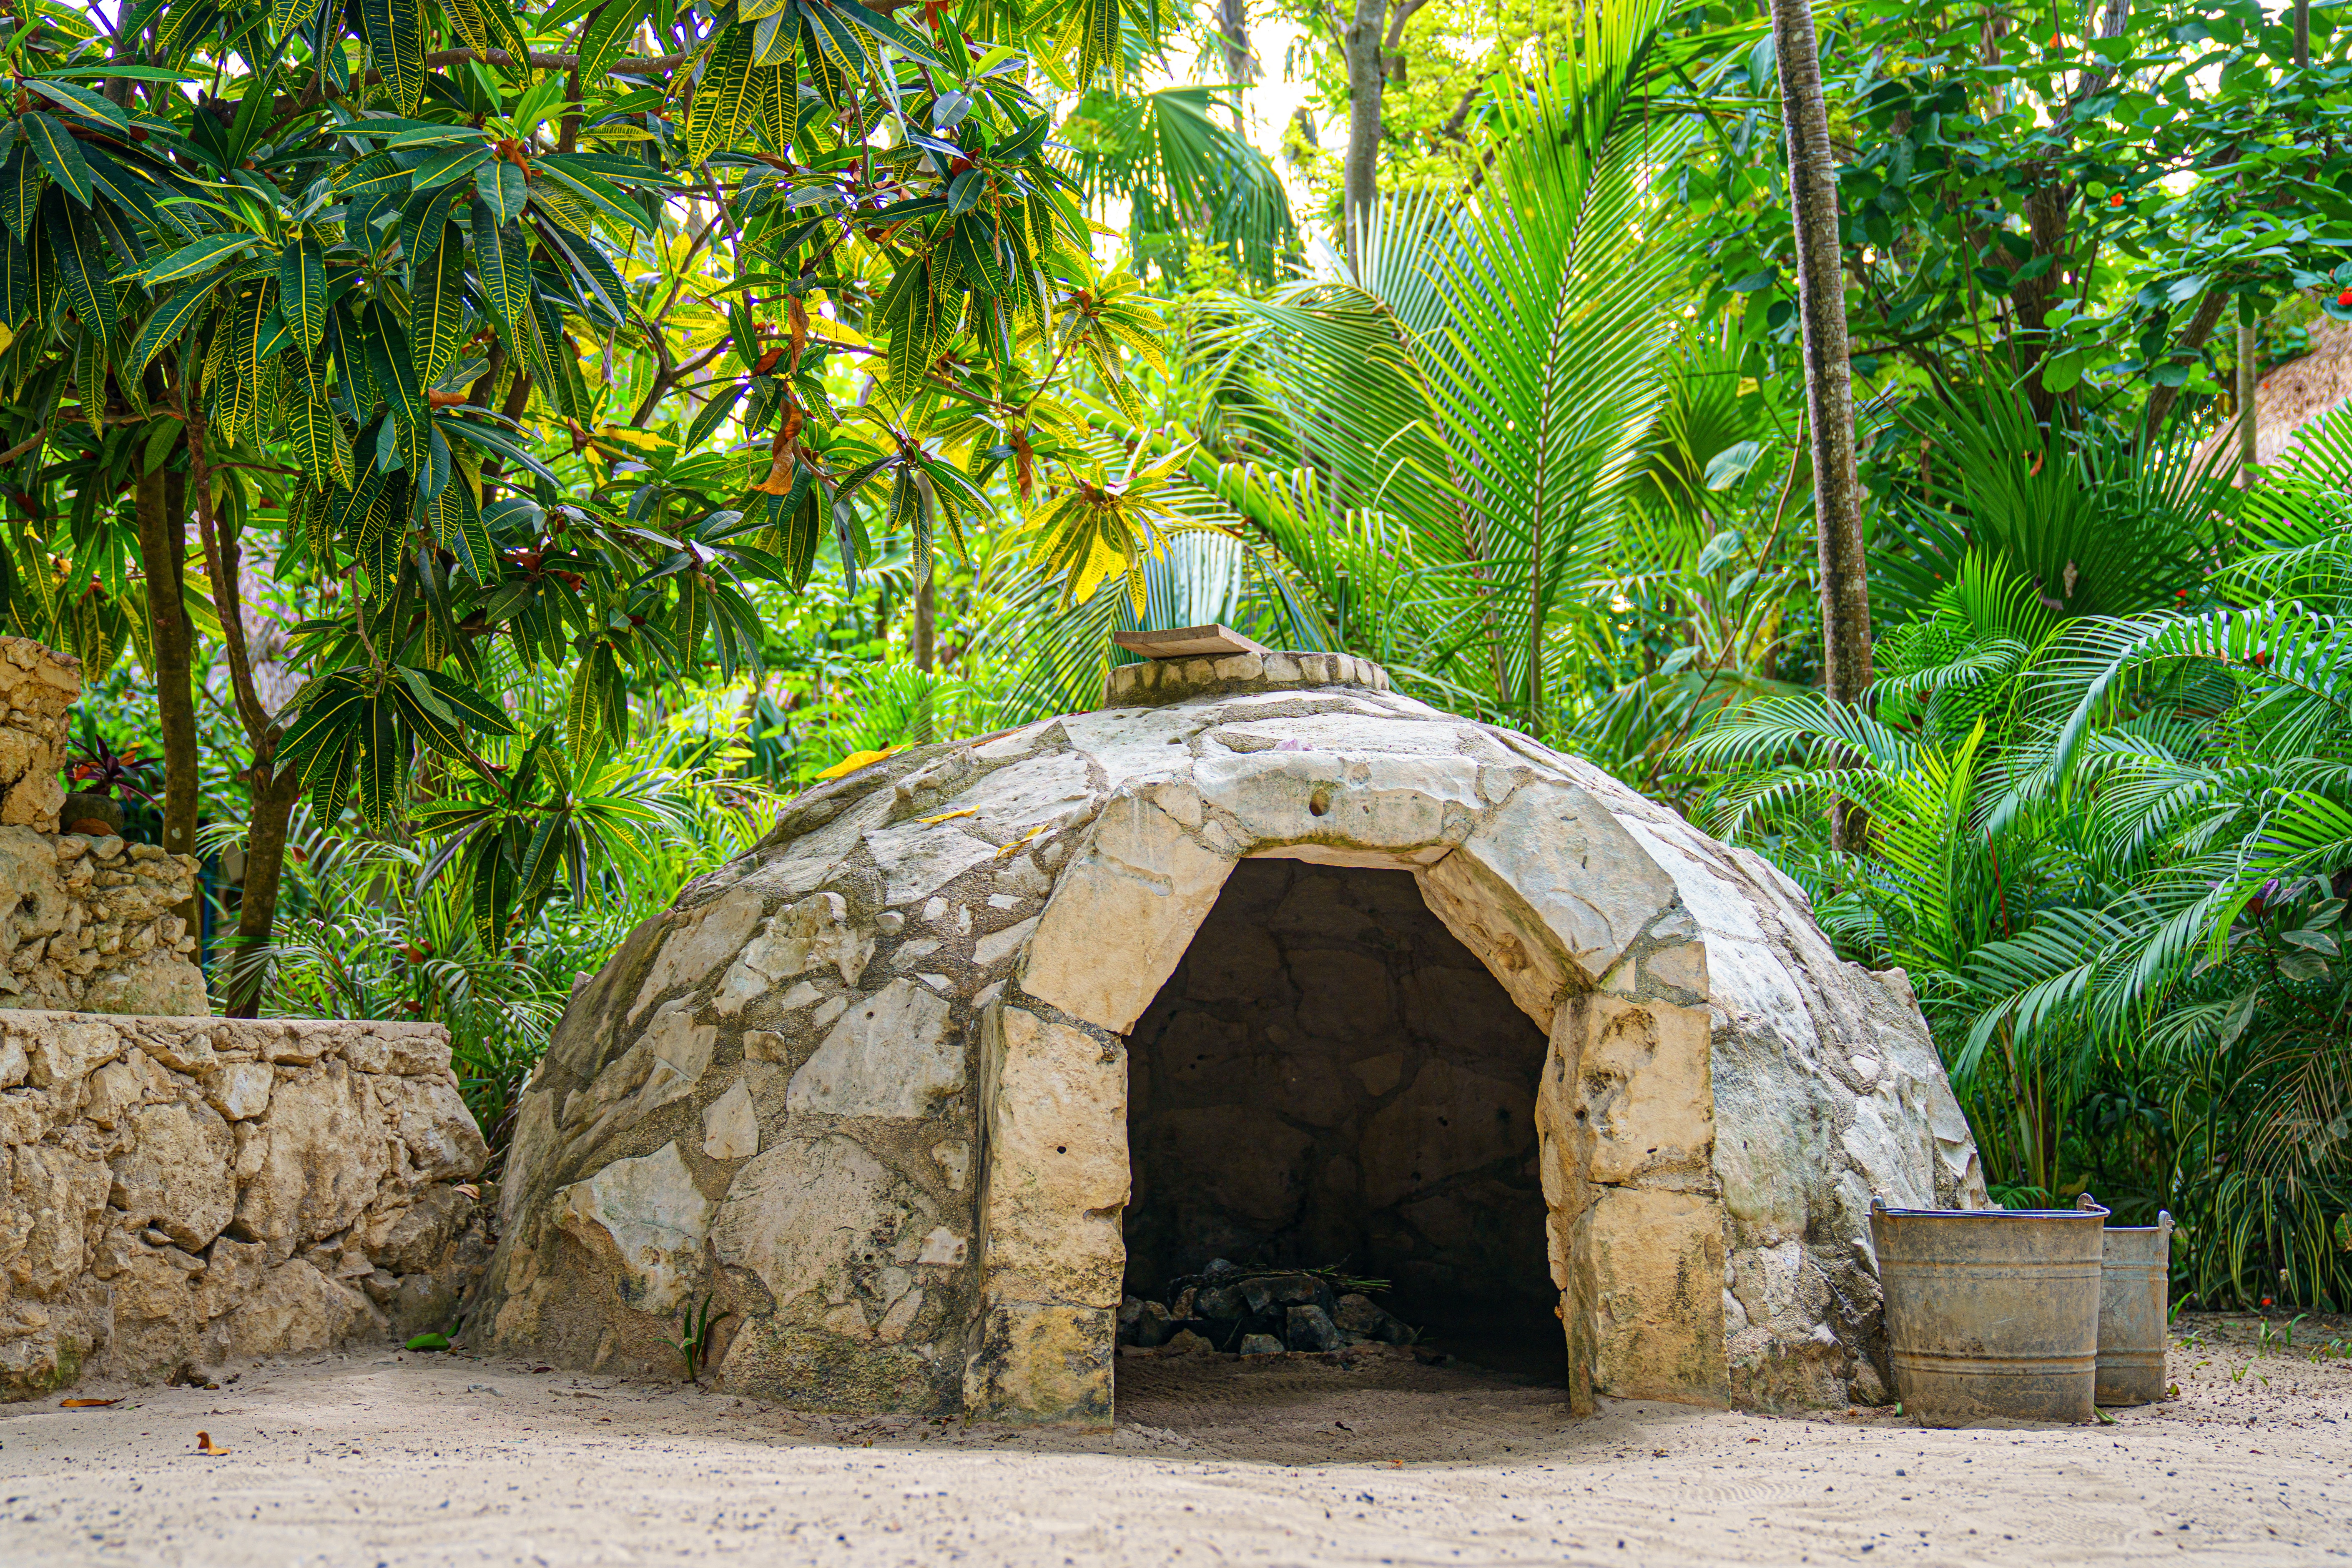 An ancient Temazcal hut also known as a Mexican sweat lodge